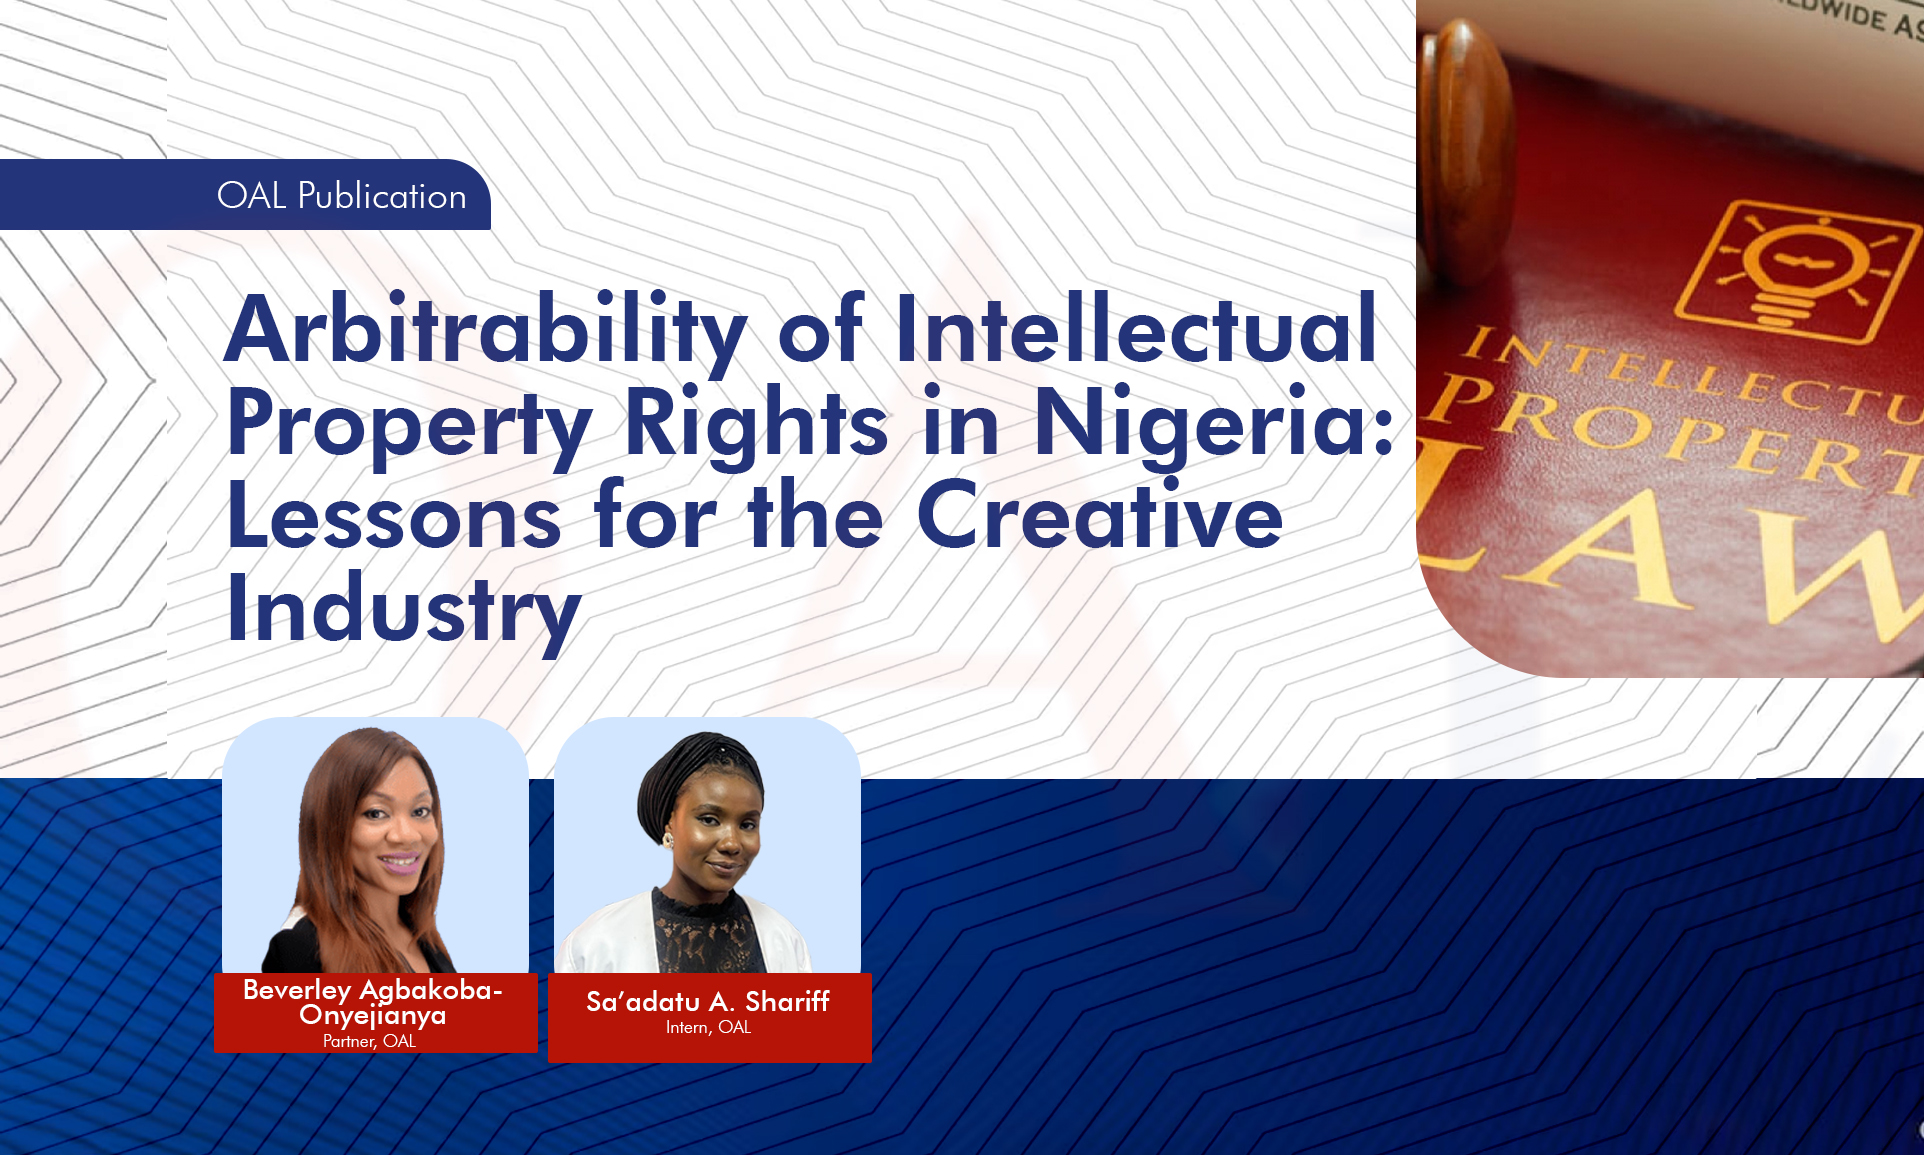 Arbitrability of Intellectual Property Rights in Nigeria: Lessons for the Creative Industry.